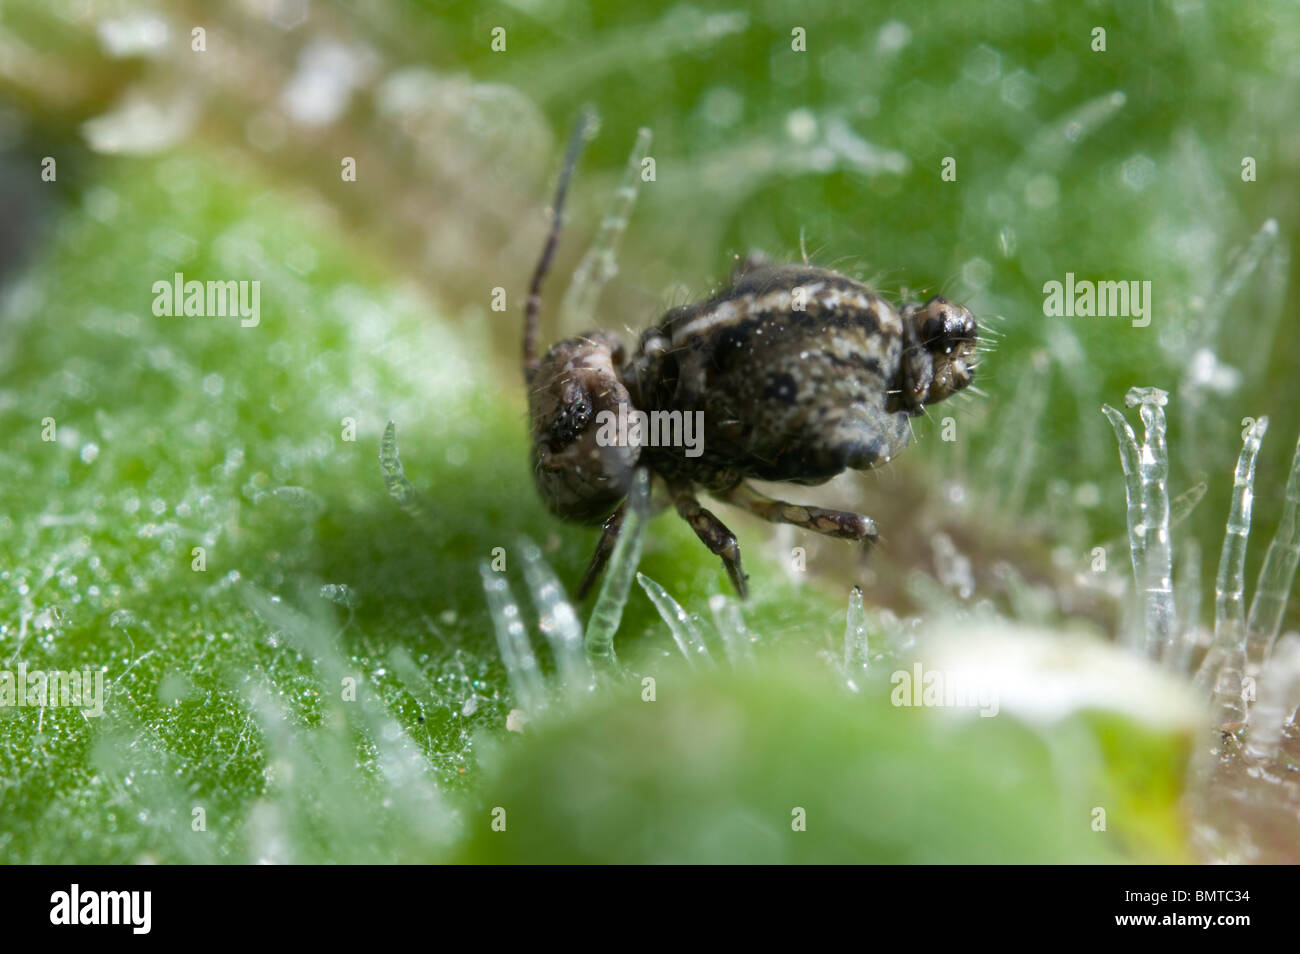 Tiny springtail insect magnified 10x Stock Photo